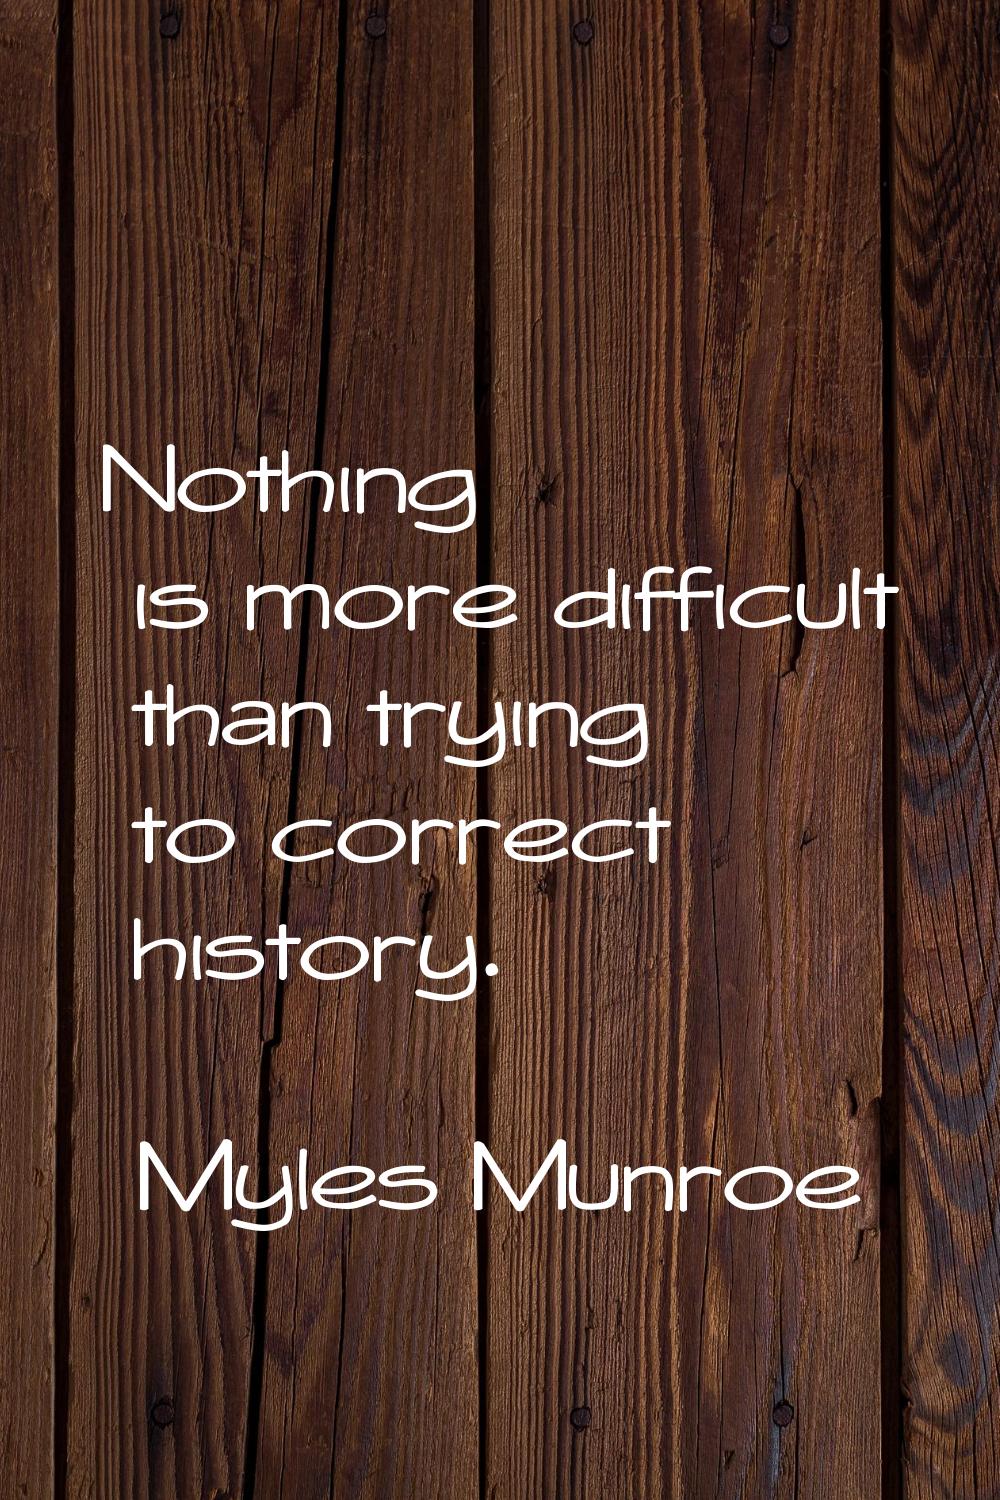 Nothing is more difficult than trying to correct history.